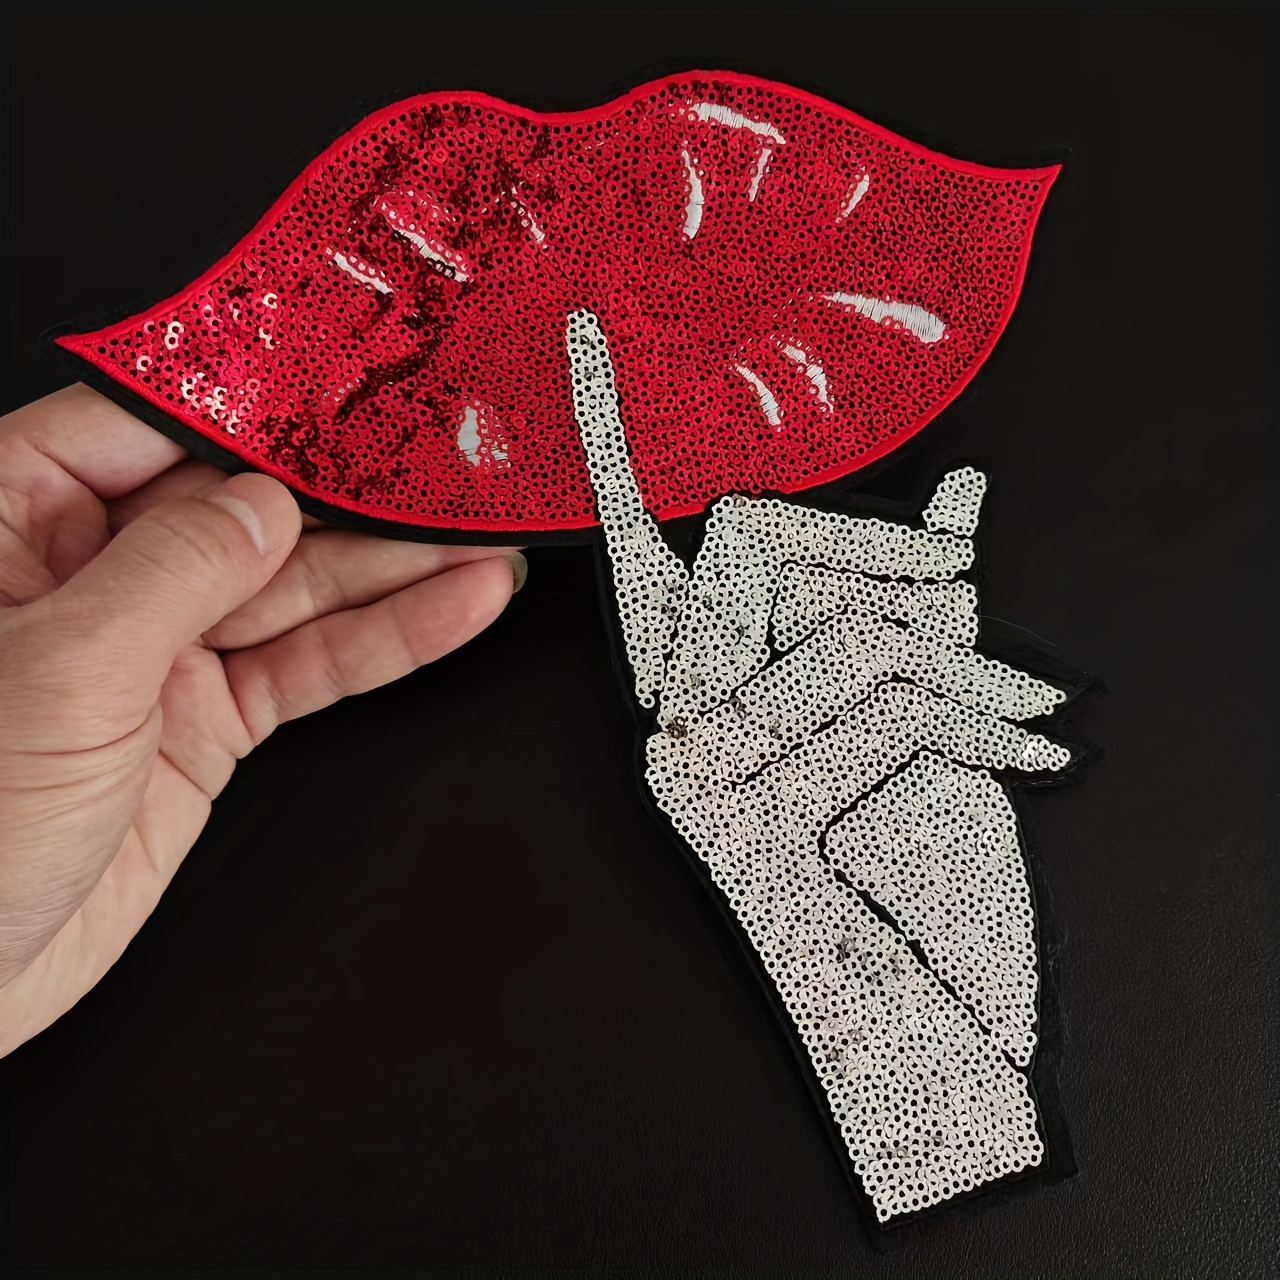 

Red Lips Sequin Patch With Finger Gesture, Iron-on Embellishment For Clothing, Glitter Heat Transfer Applique For Diy Costume, Shirt And Jacket Decor, 3d Sparkling Fashion Accessory